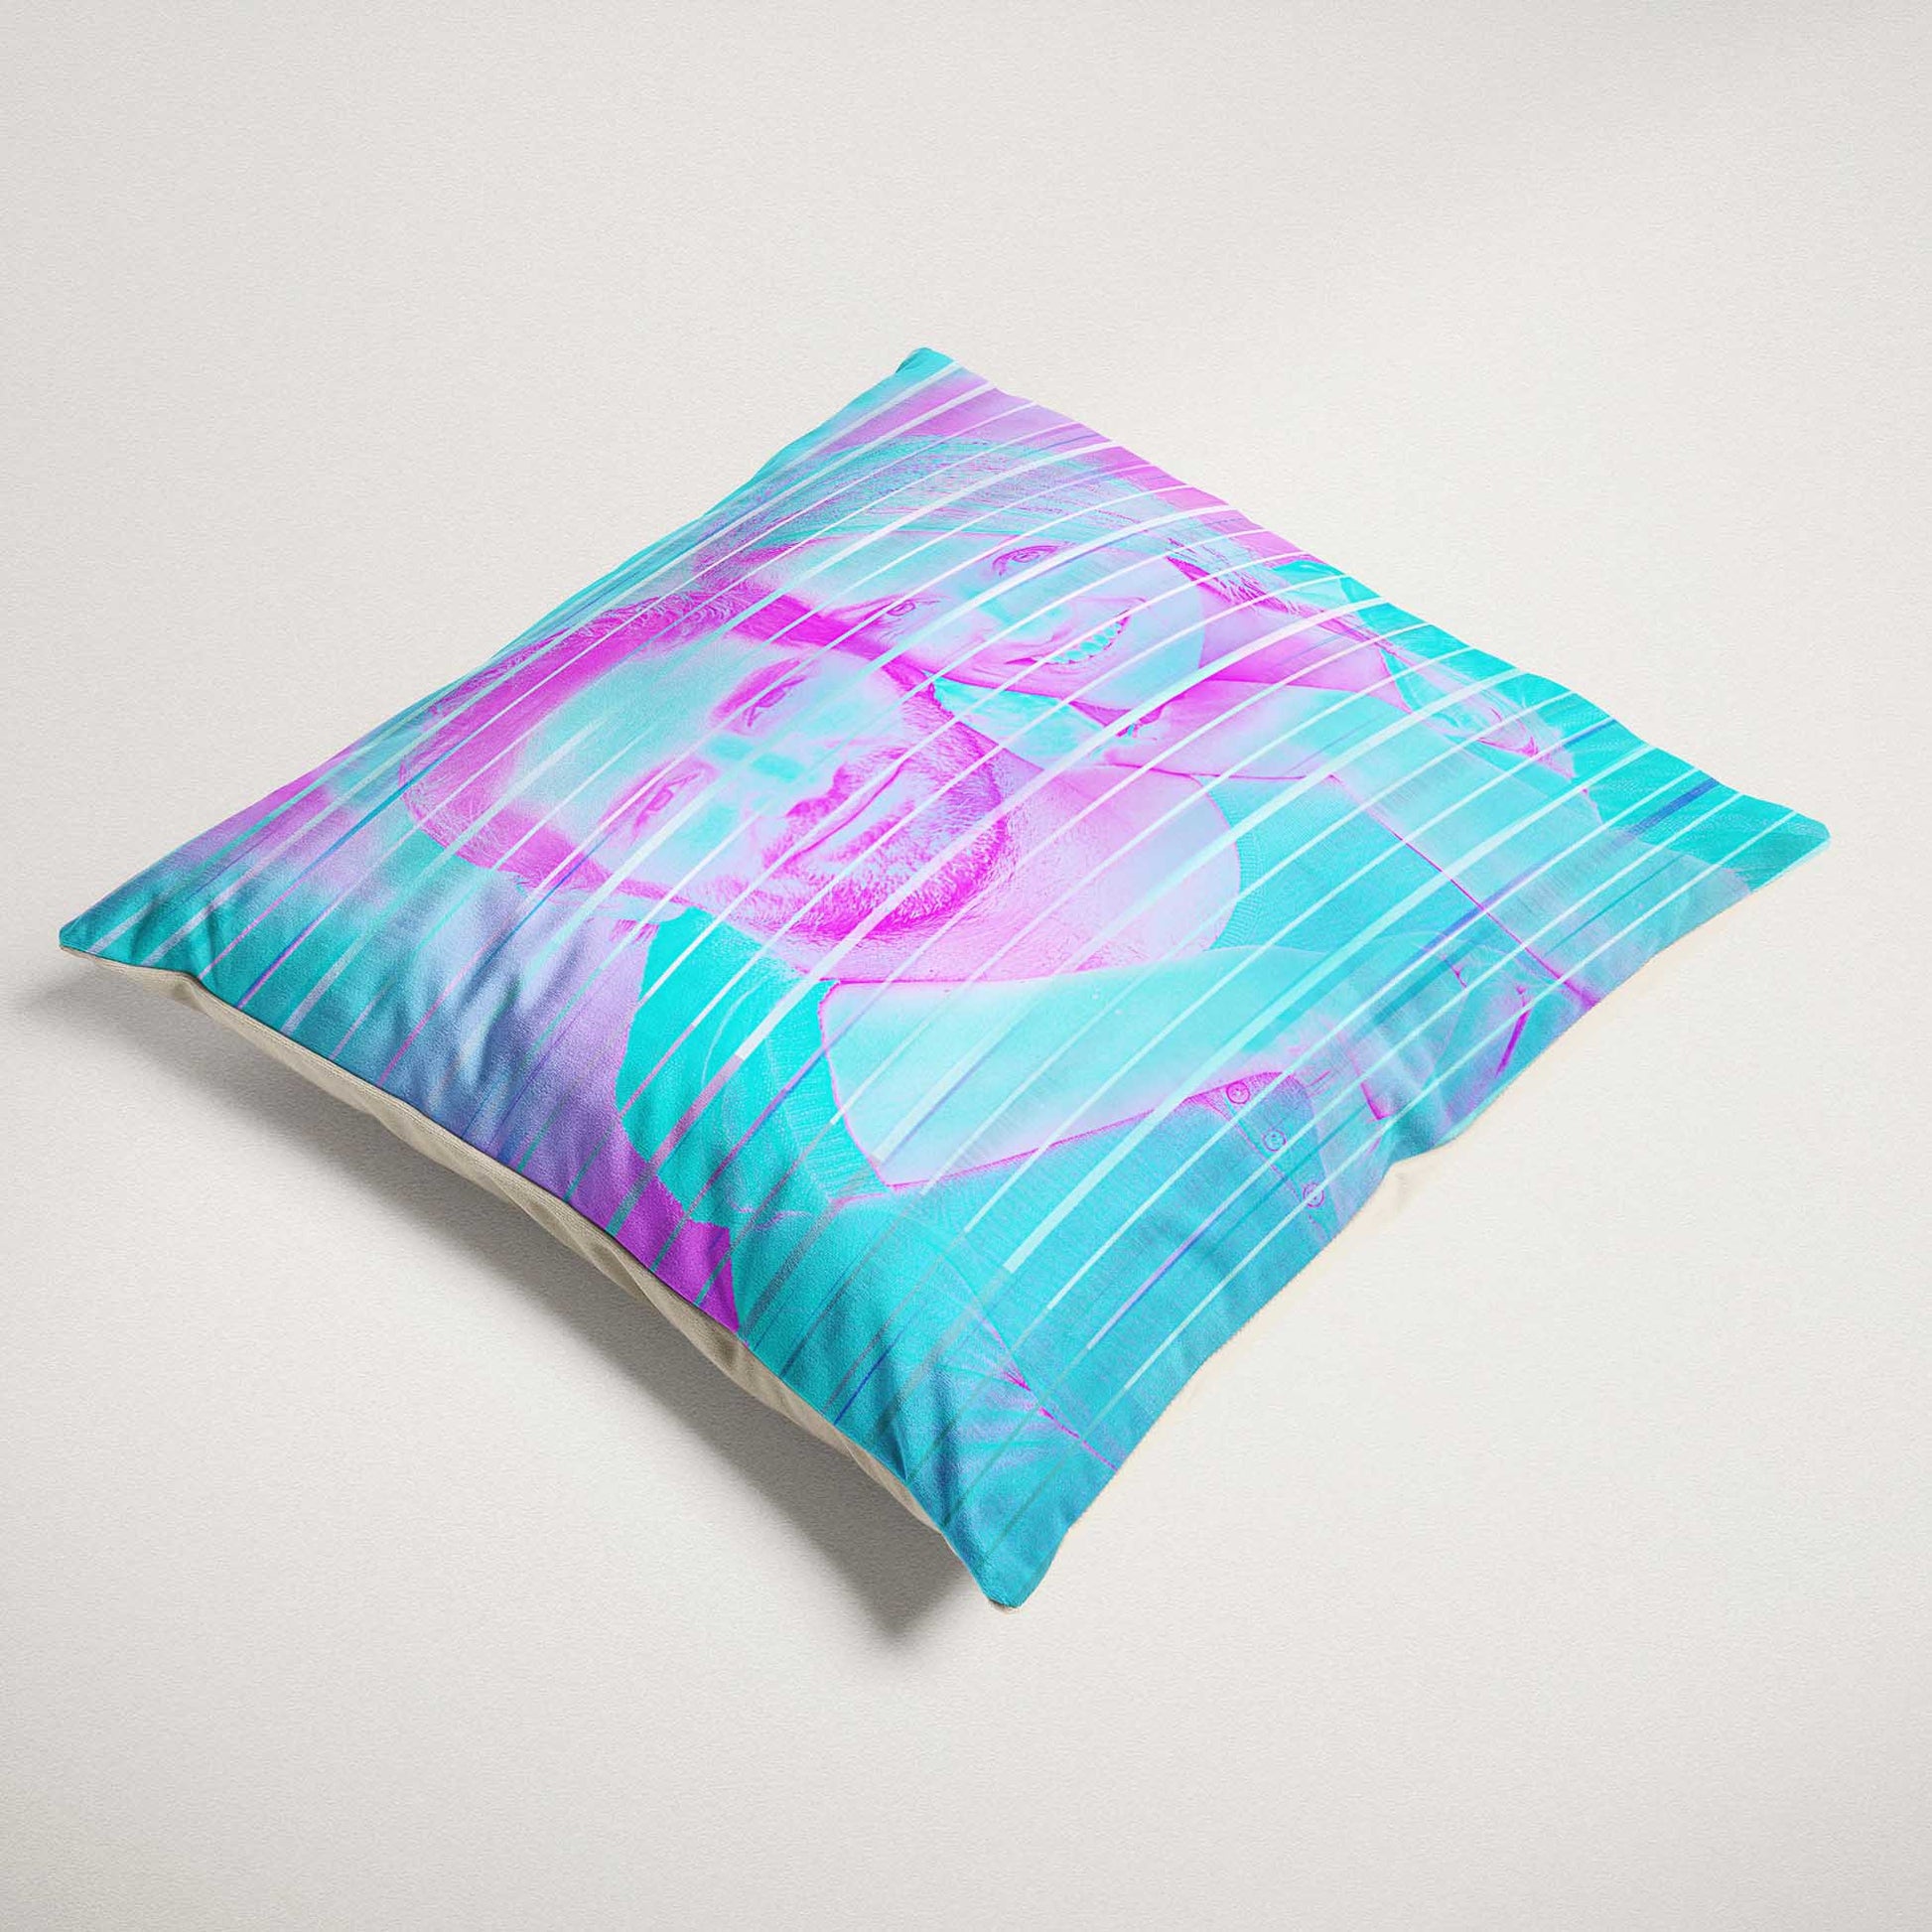 Experience the beauty of the Personalised Purple and Blue Cushion. Its vibrant and vivid hues add a modern and stylish flair to any space. Made from soft velvet, this cushion offers a cozy and inviting touch